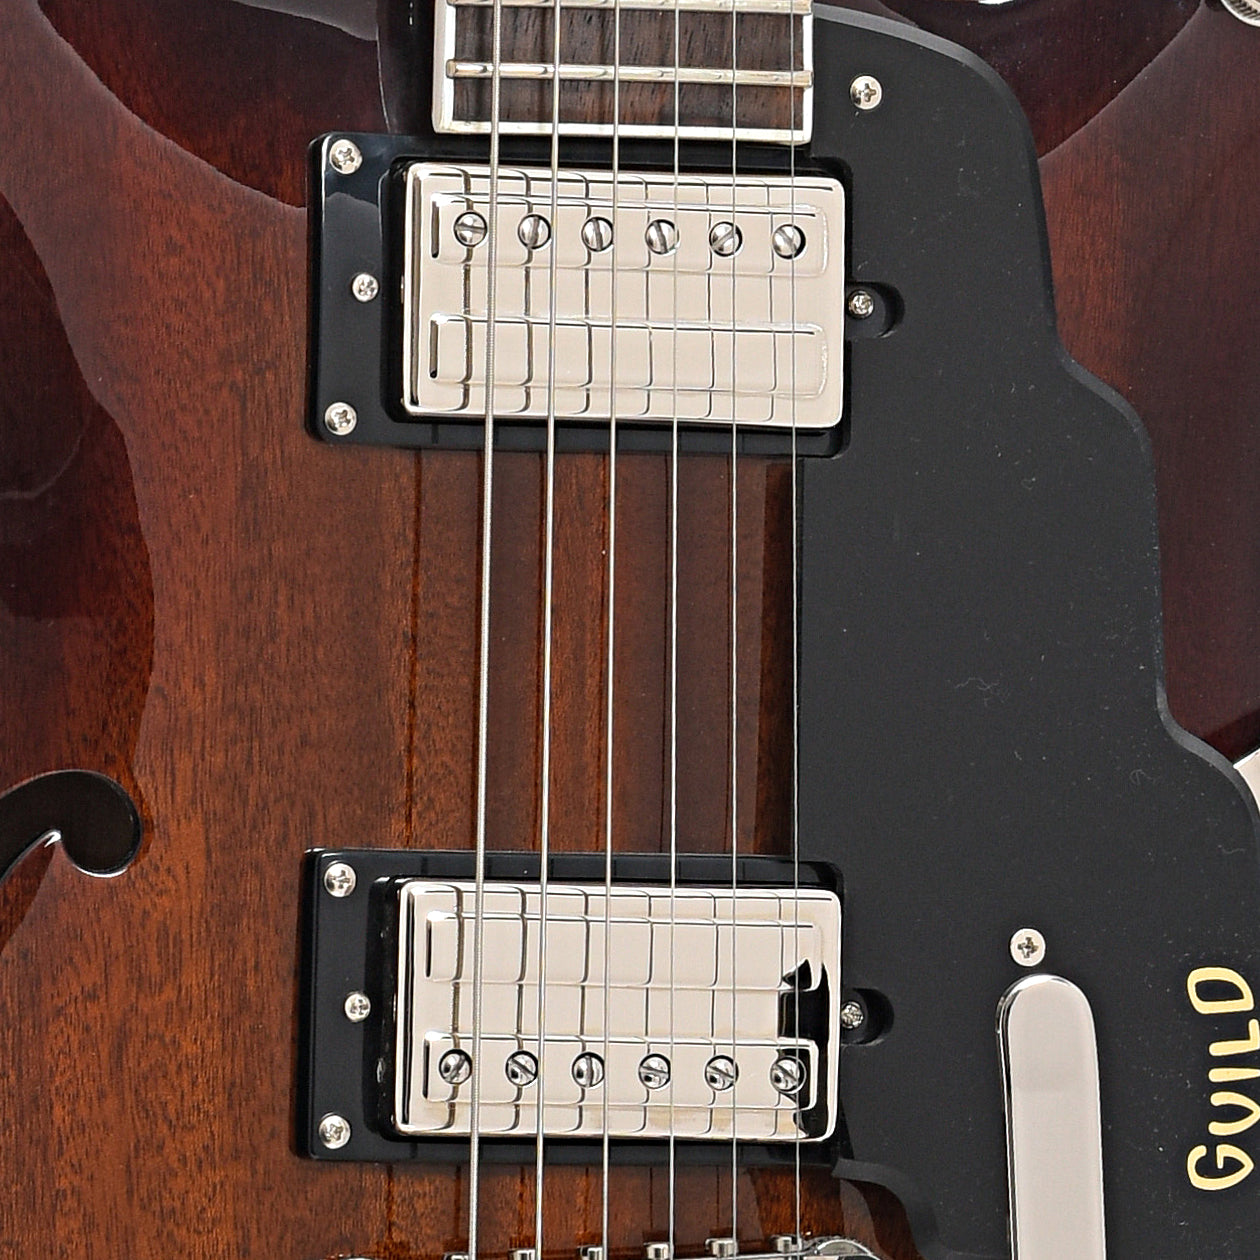 Pickups of Guild Starfire I Double Cutaway Semi-Hollow Body Guitar with GVT, California Burst